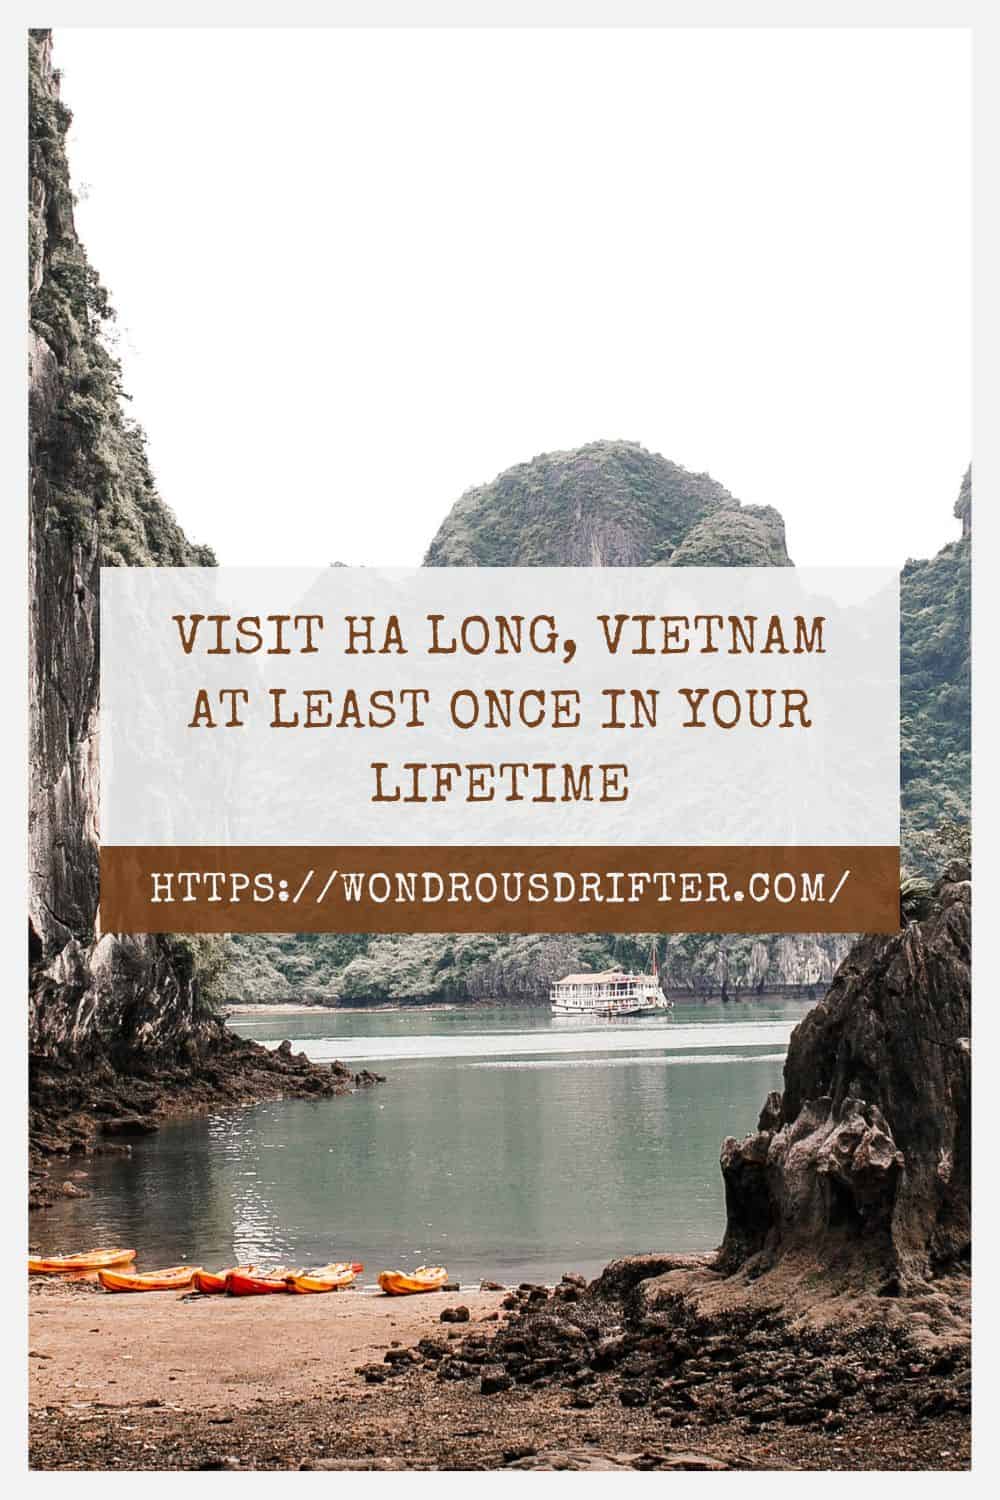 Visit Ha Long Vietnam at least once in your lifetime